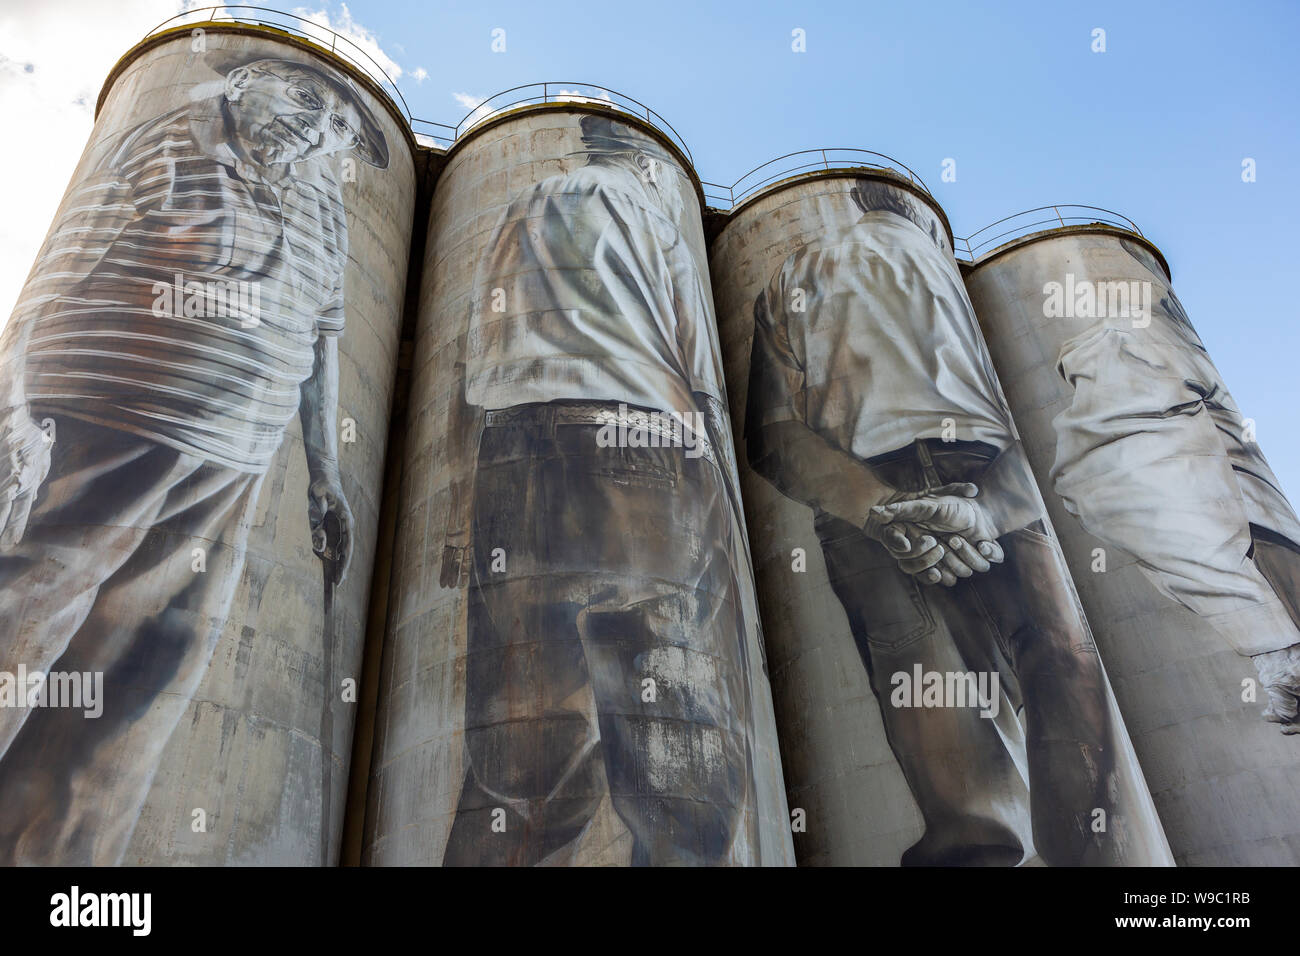 The Portland Silo Art project known as the foundations located in new south wales australia on 2nd August 2019 Stock Photo